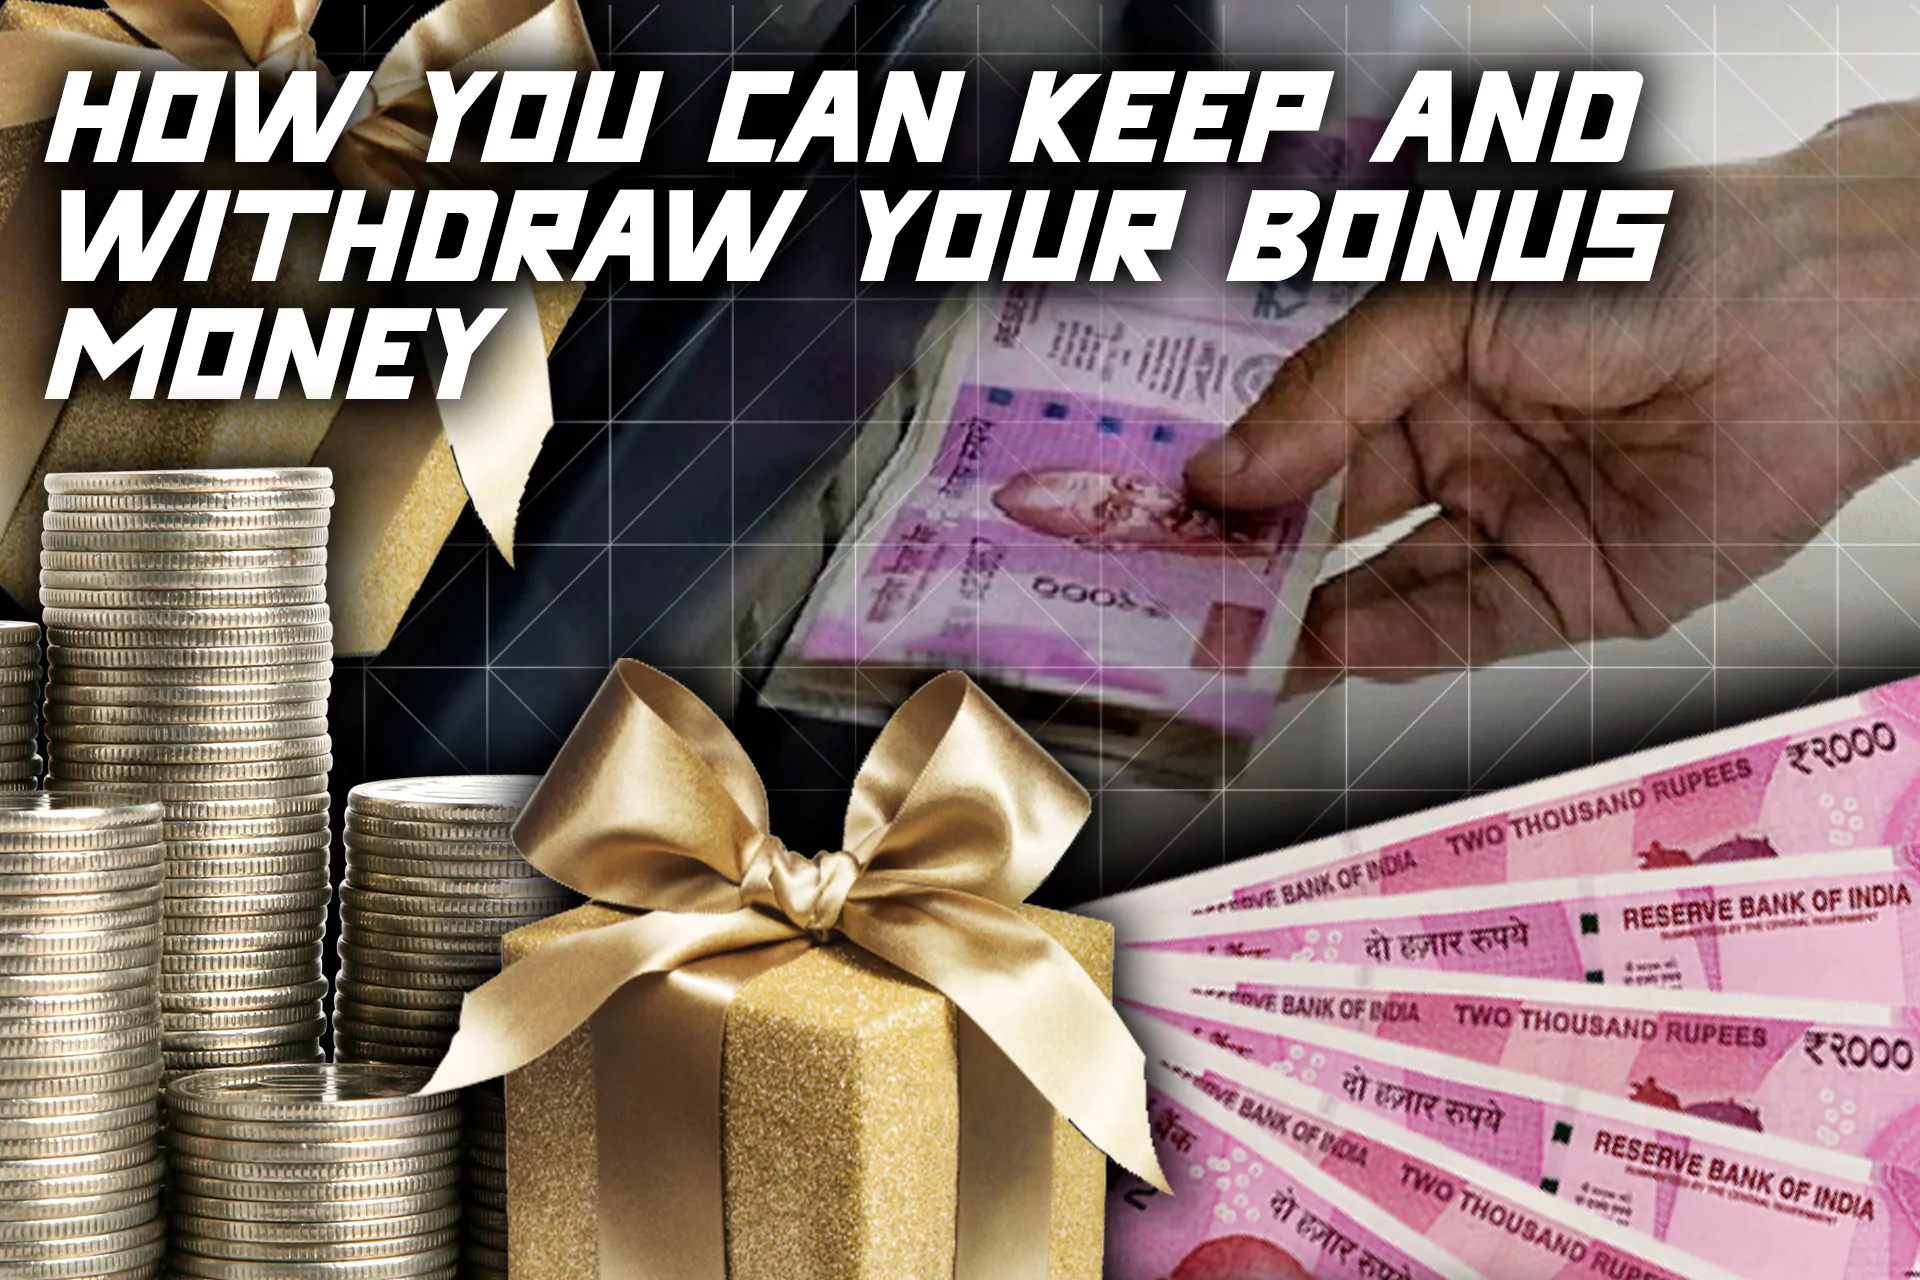 About how you can receive and withdraw your bonus money received through the use of the no deposit bonus.